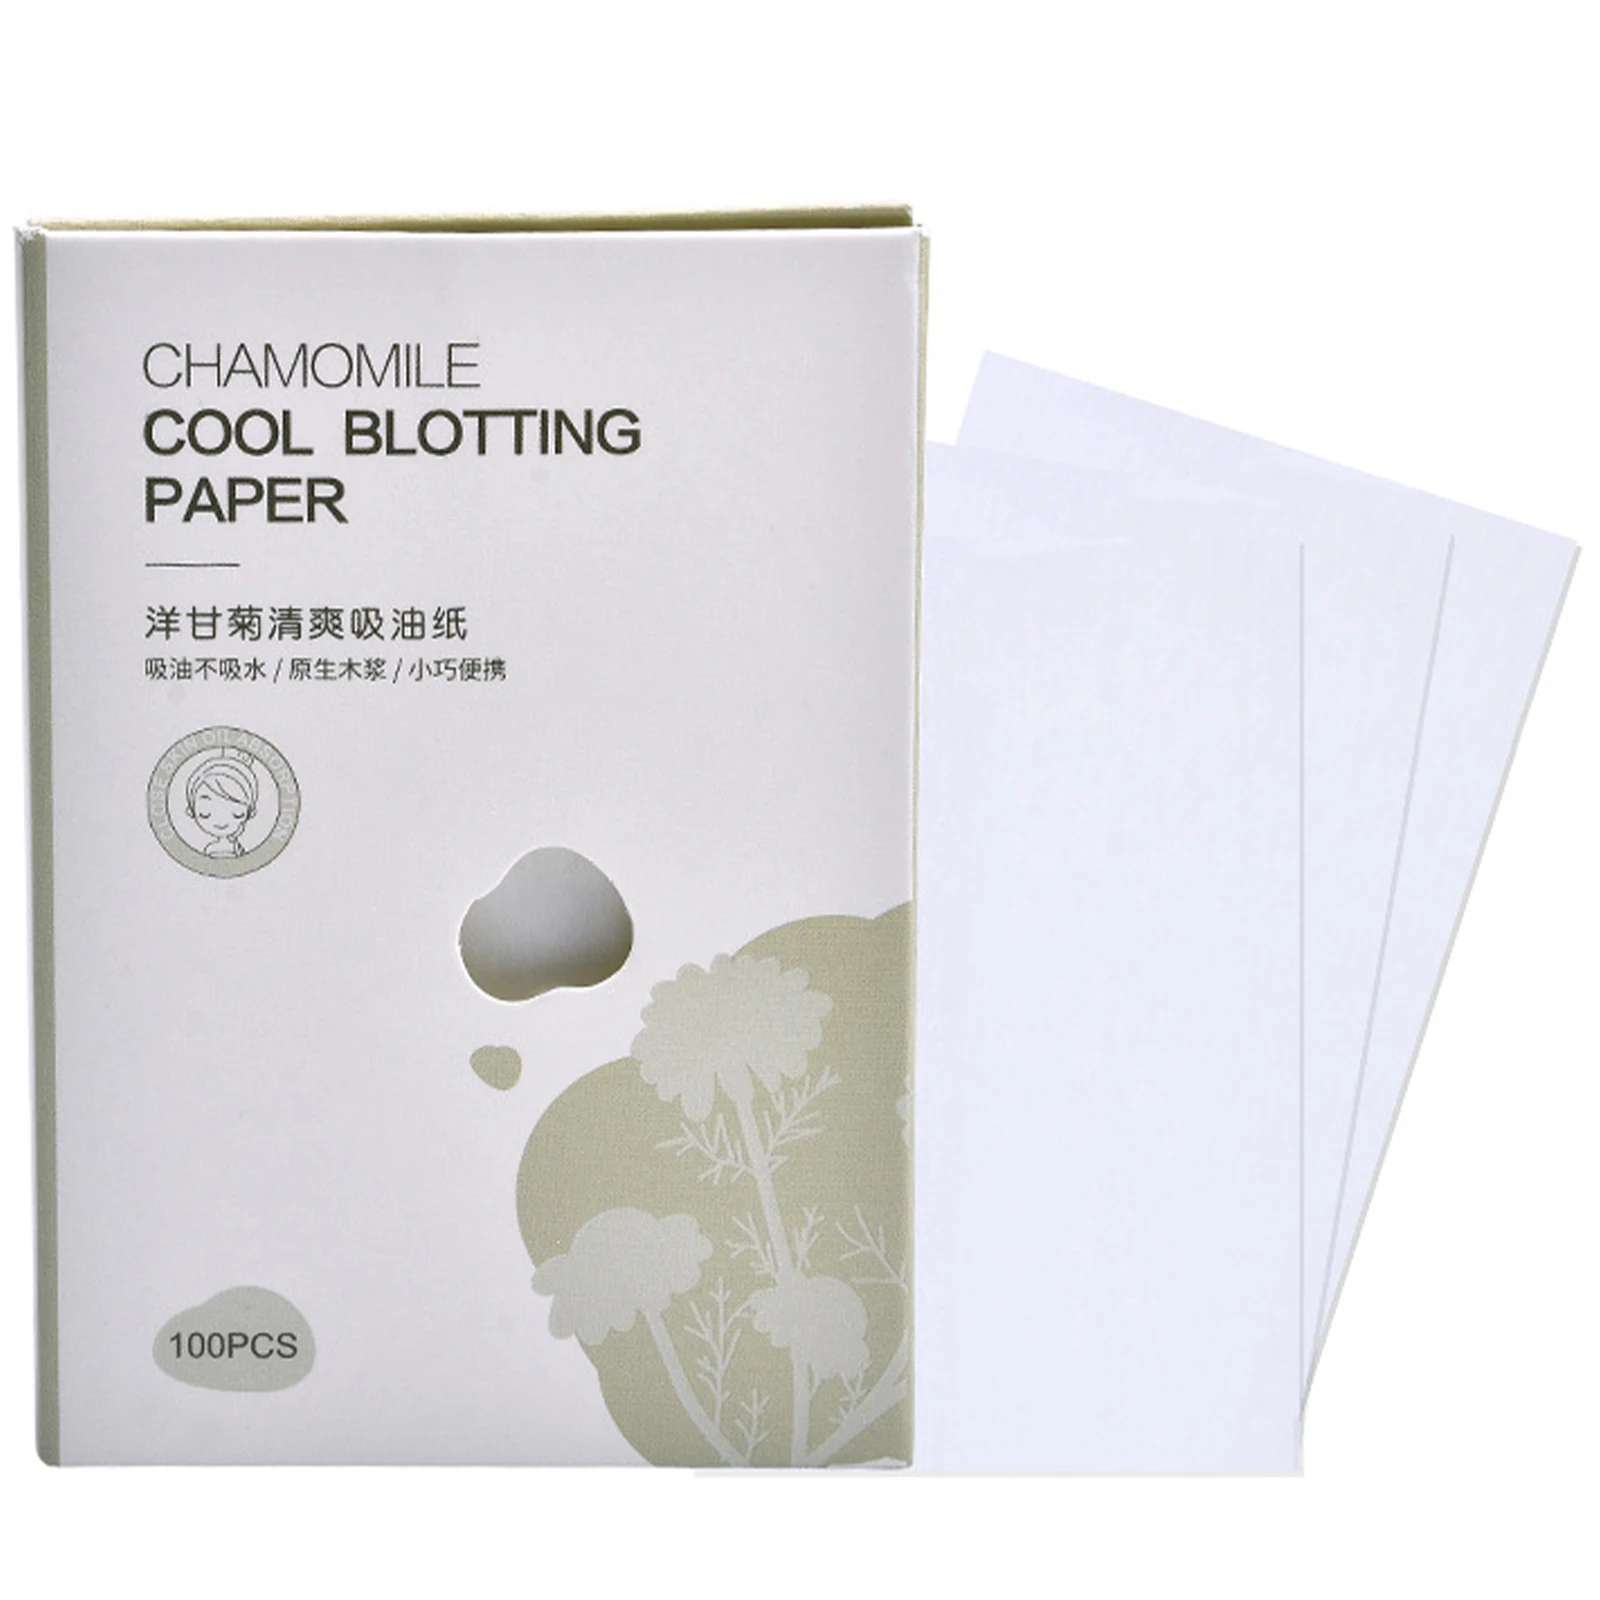 

100Pcs Protable Facial Absorbent Paper Oil Control Wipes Chamomile Sheet Oily Face Blotting Matting Tissue Makeup Facial Clean